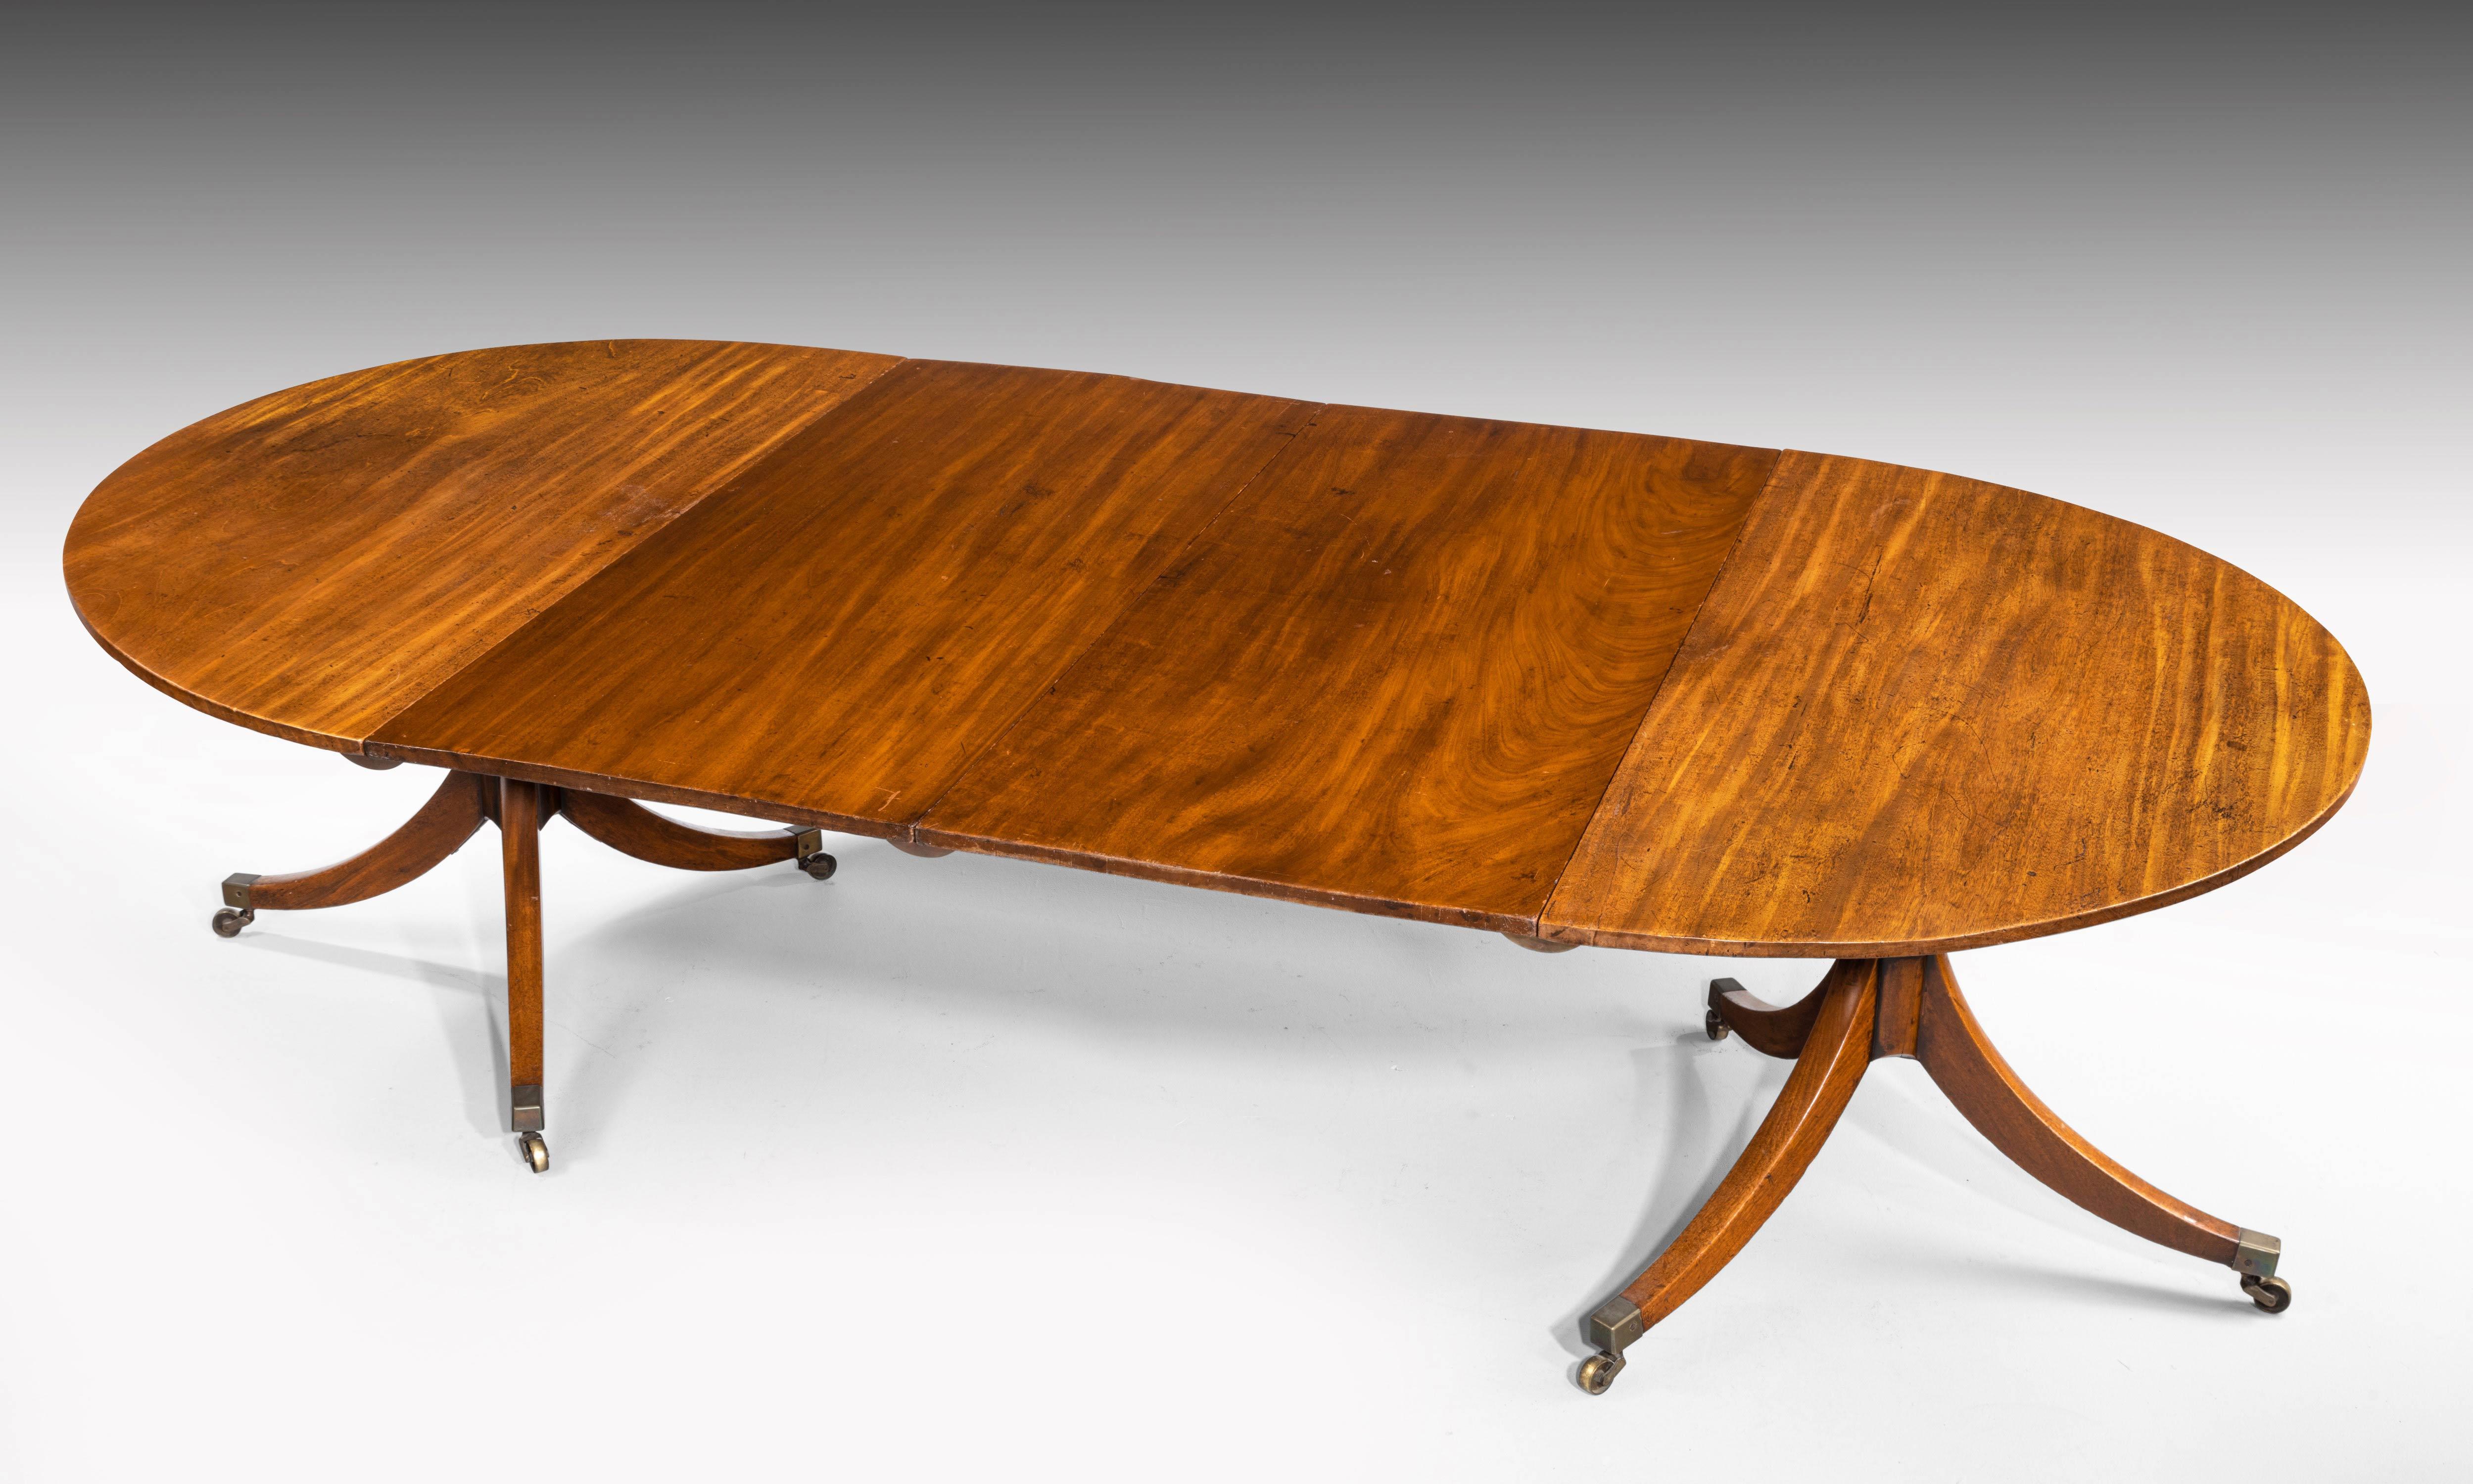 An attractive George III mahogany two pillar dining table with circular ends. Retaining the original shoes and castors. Two extra leaves with bearers can be used in various formats.